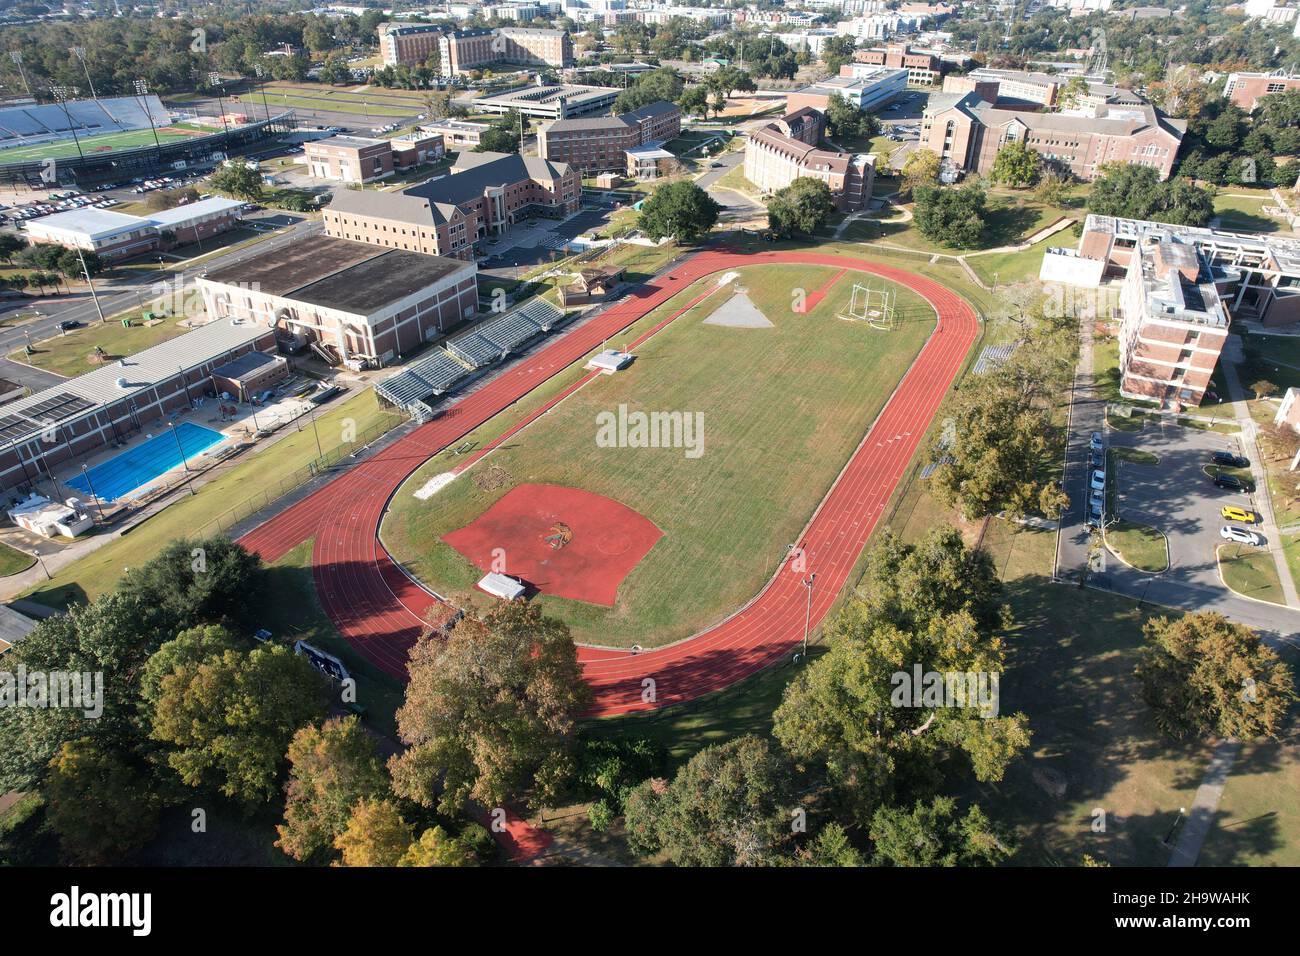 An aerial view of Pete Griffin Track on the campus of Florida A&M University, Saturday, Nov. 20, 2021, in Tallahassee, Fla. The stadium is the home of Stock Photo